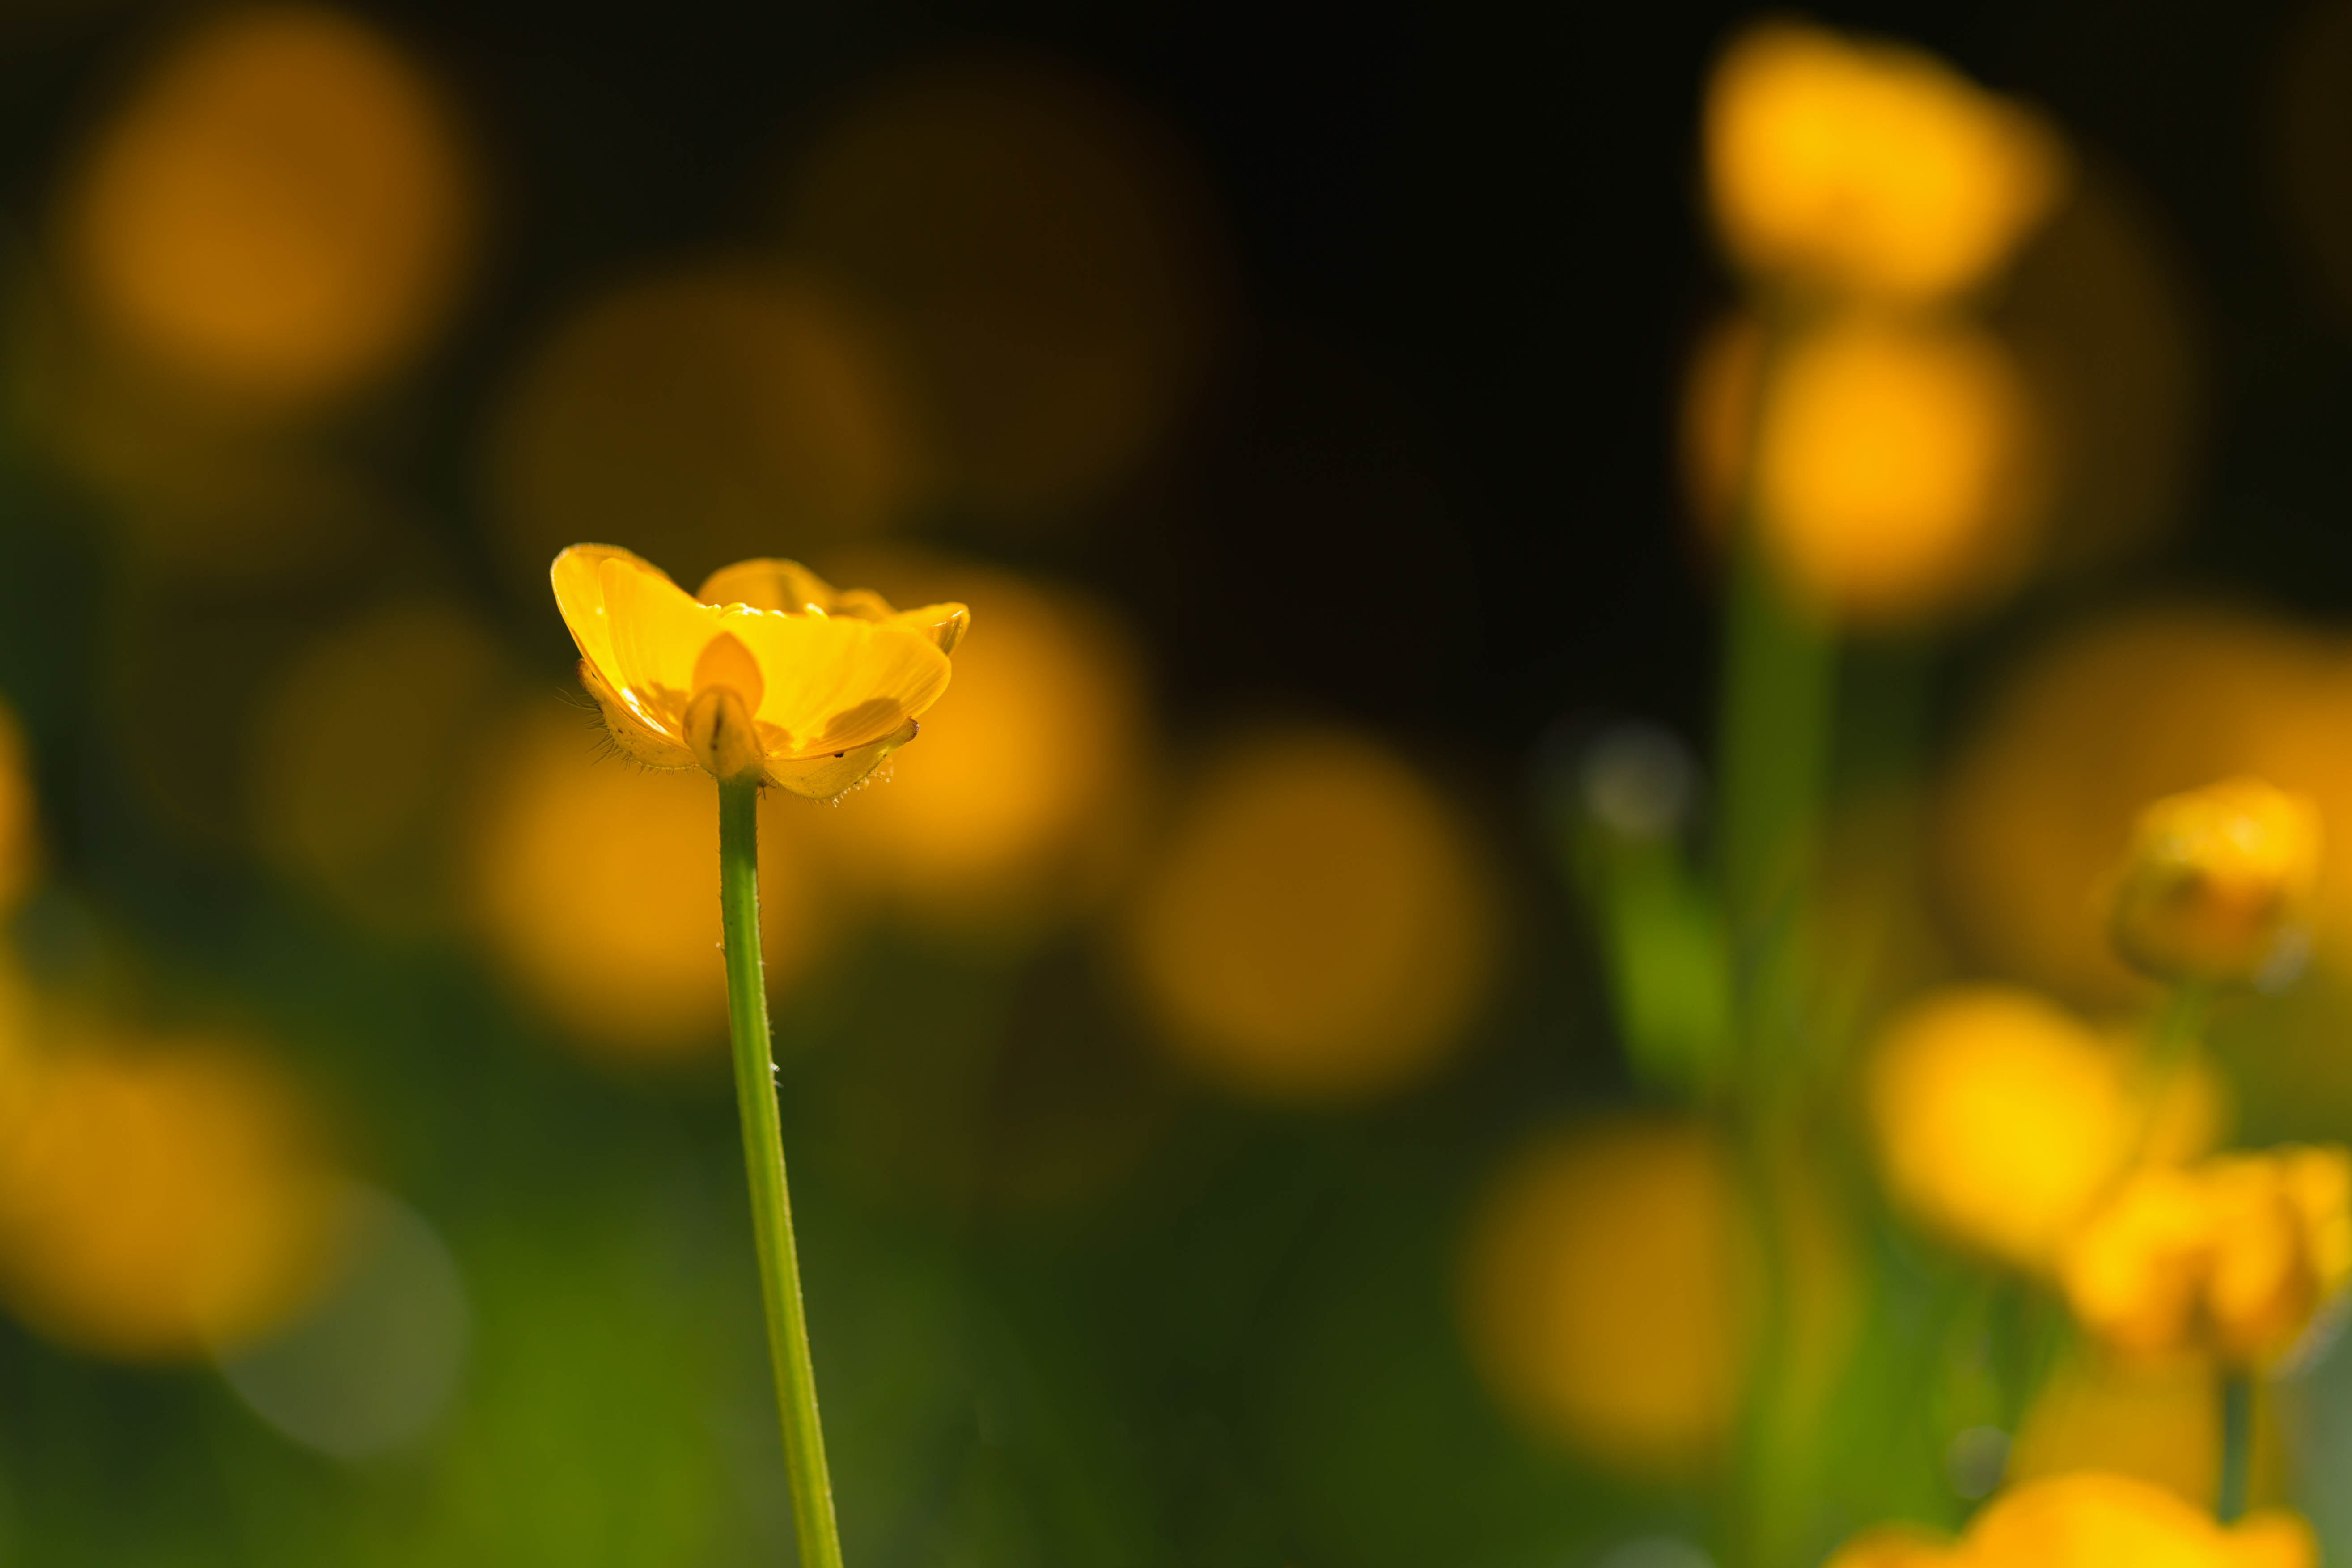 zoom-in photo of yellow flowering plant, buttercups